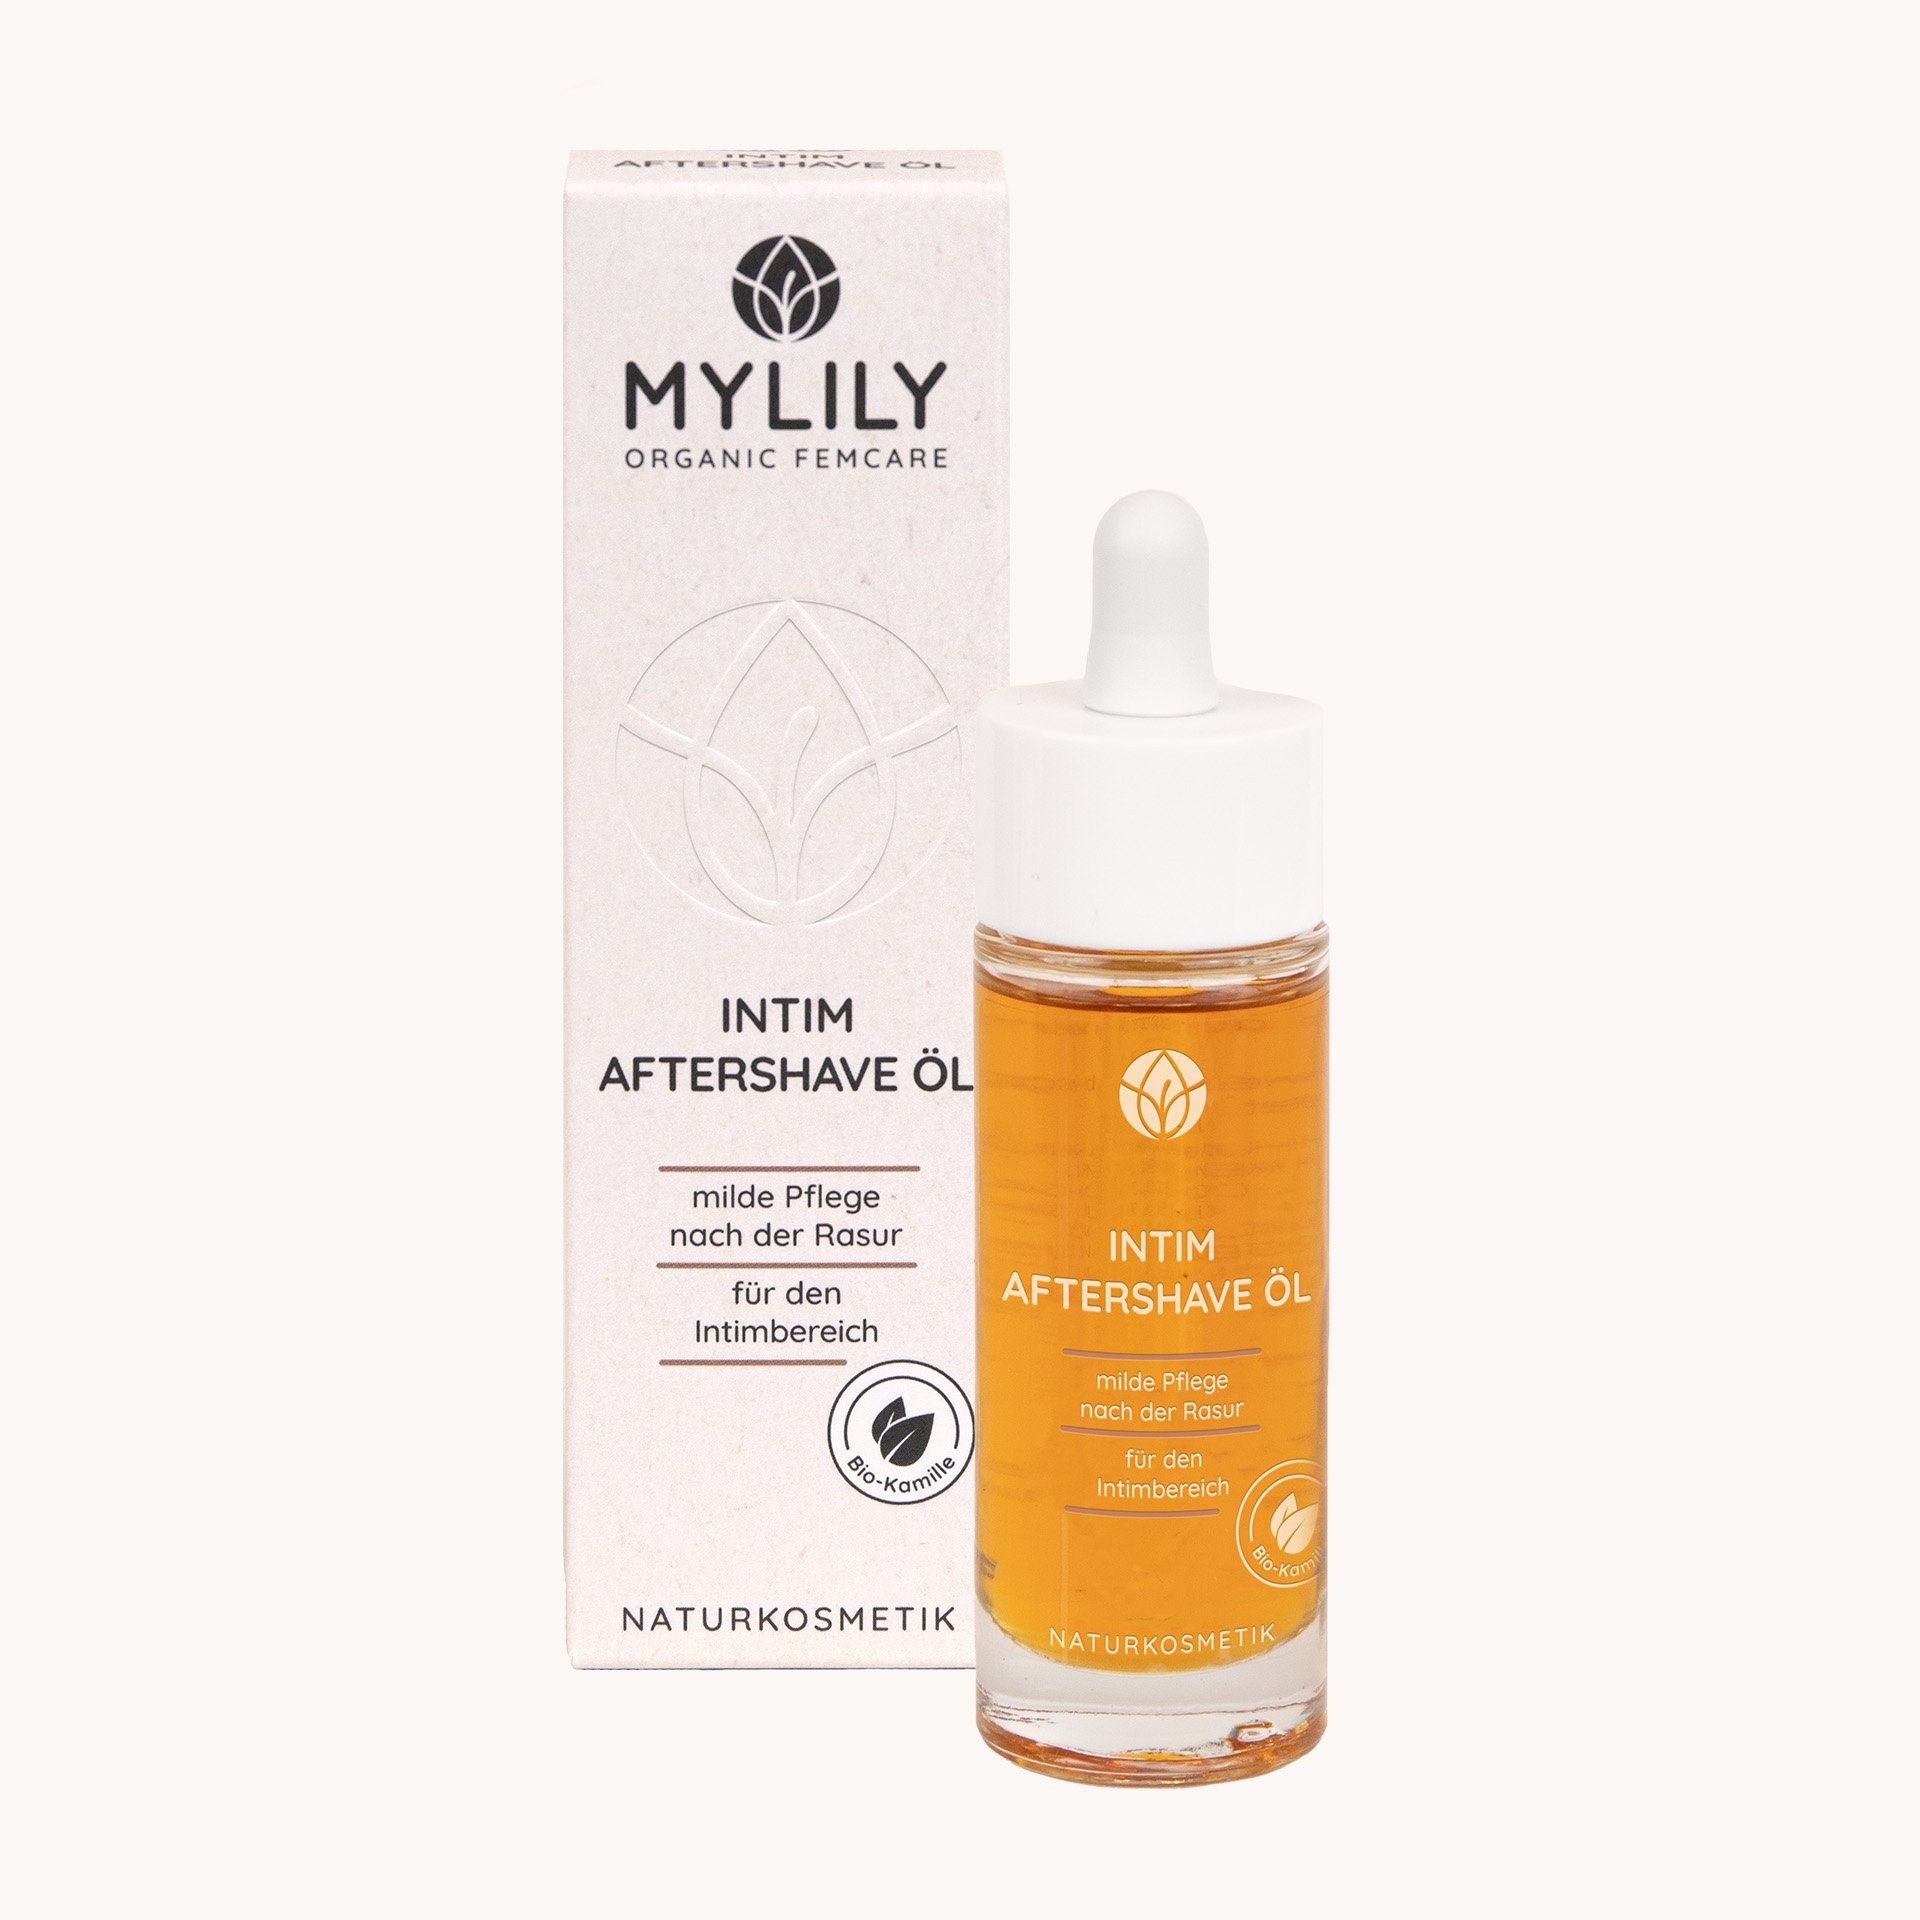 mit 1-tlg. Intim After Shave Aftershave Lotion MYLILY Öl Bio-Kamille,